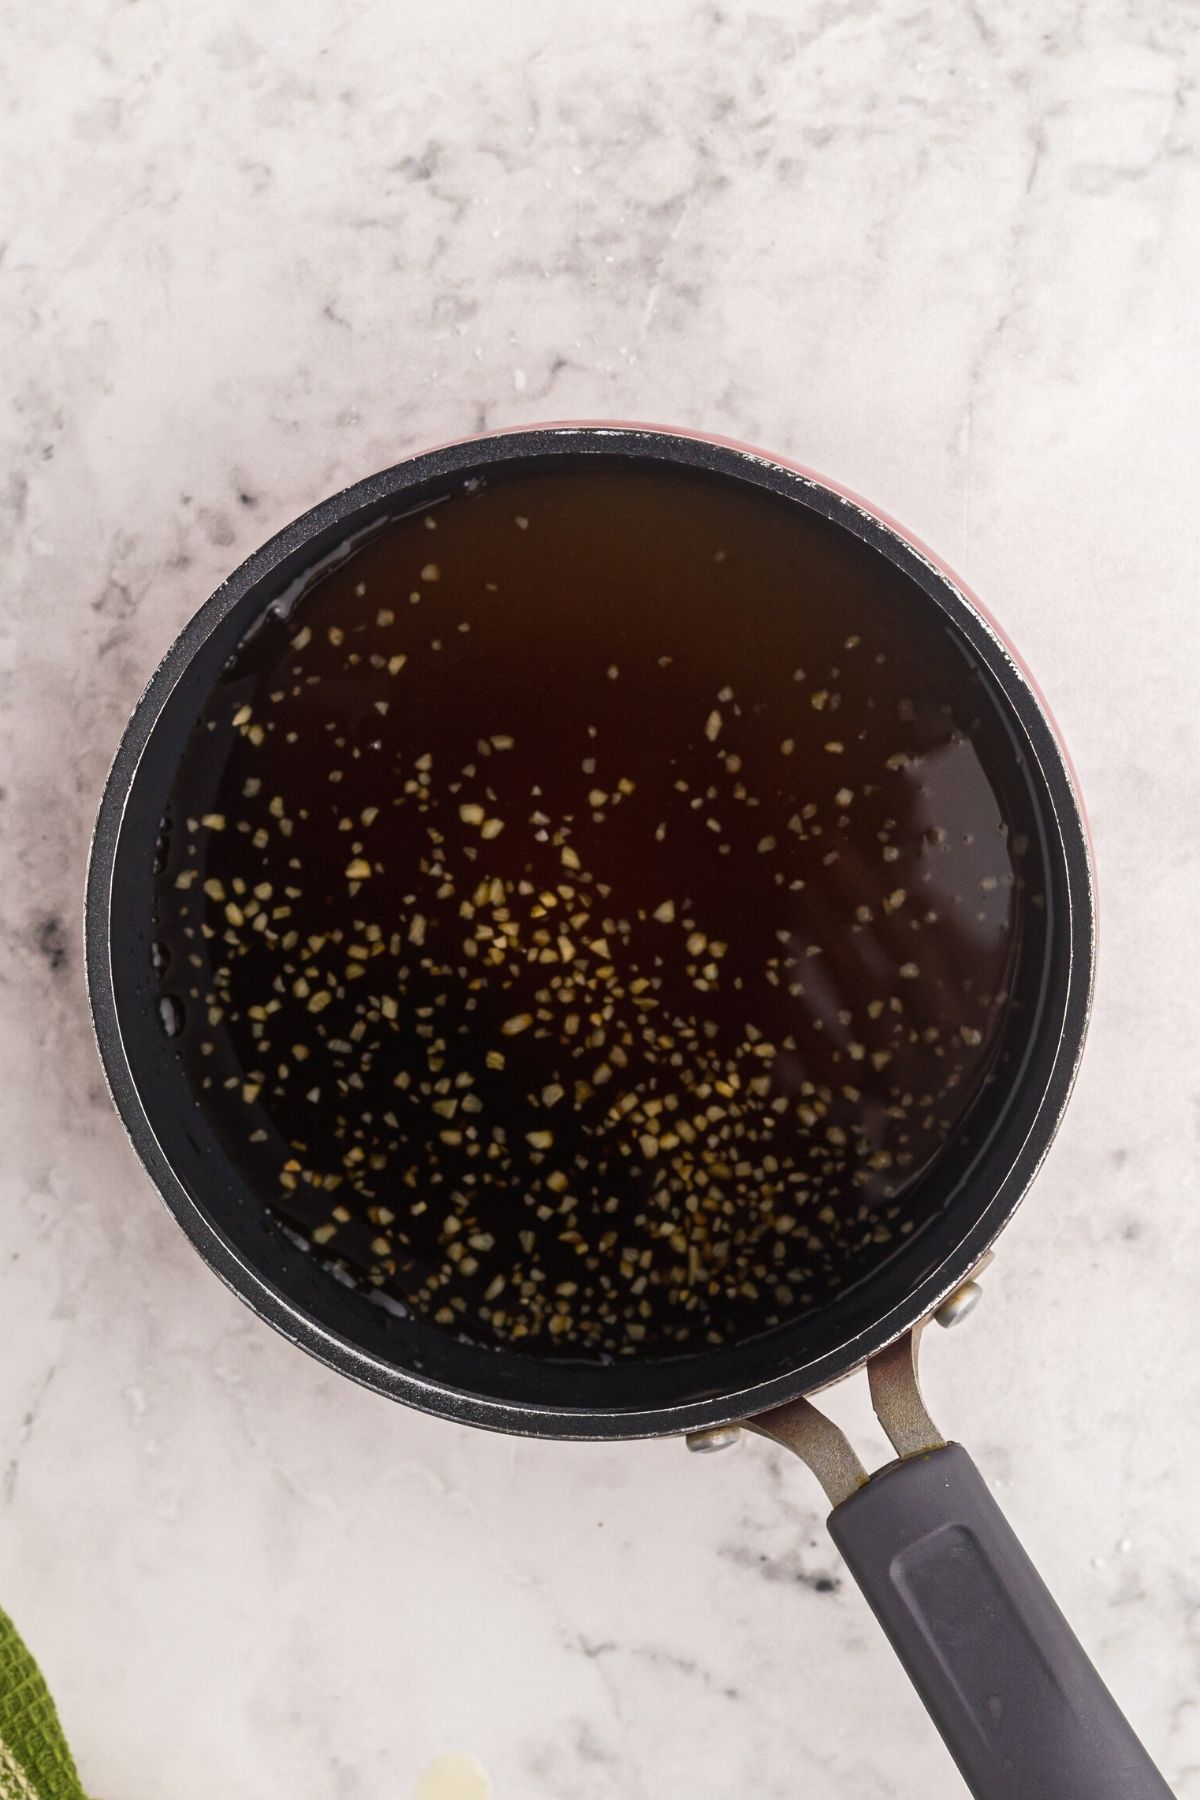 Sweet and sour sauce being made in a small saucepan